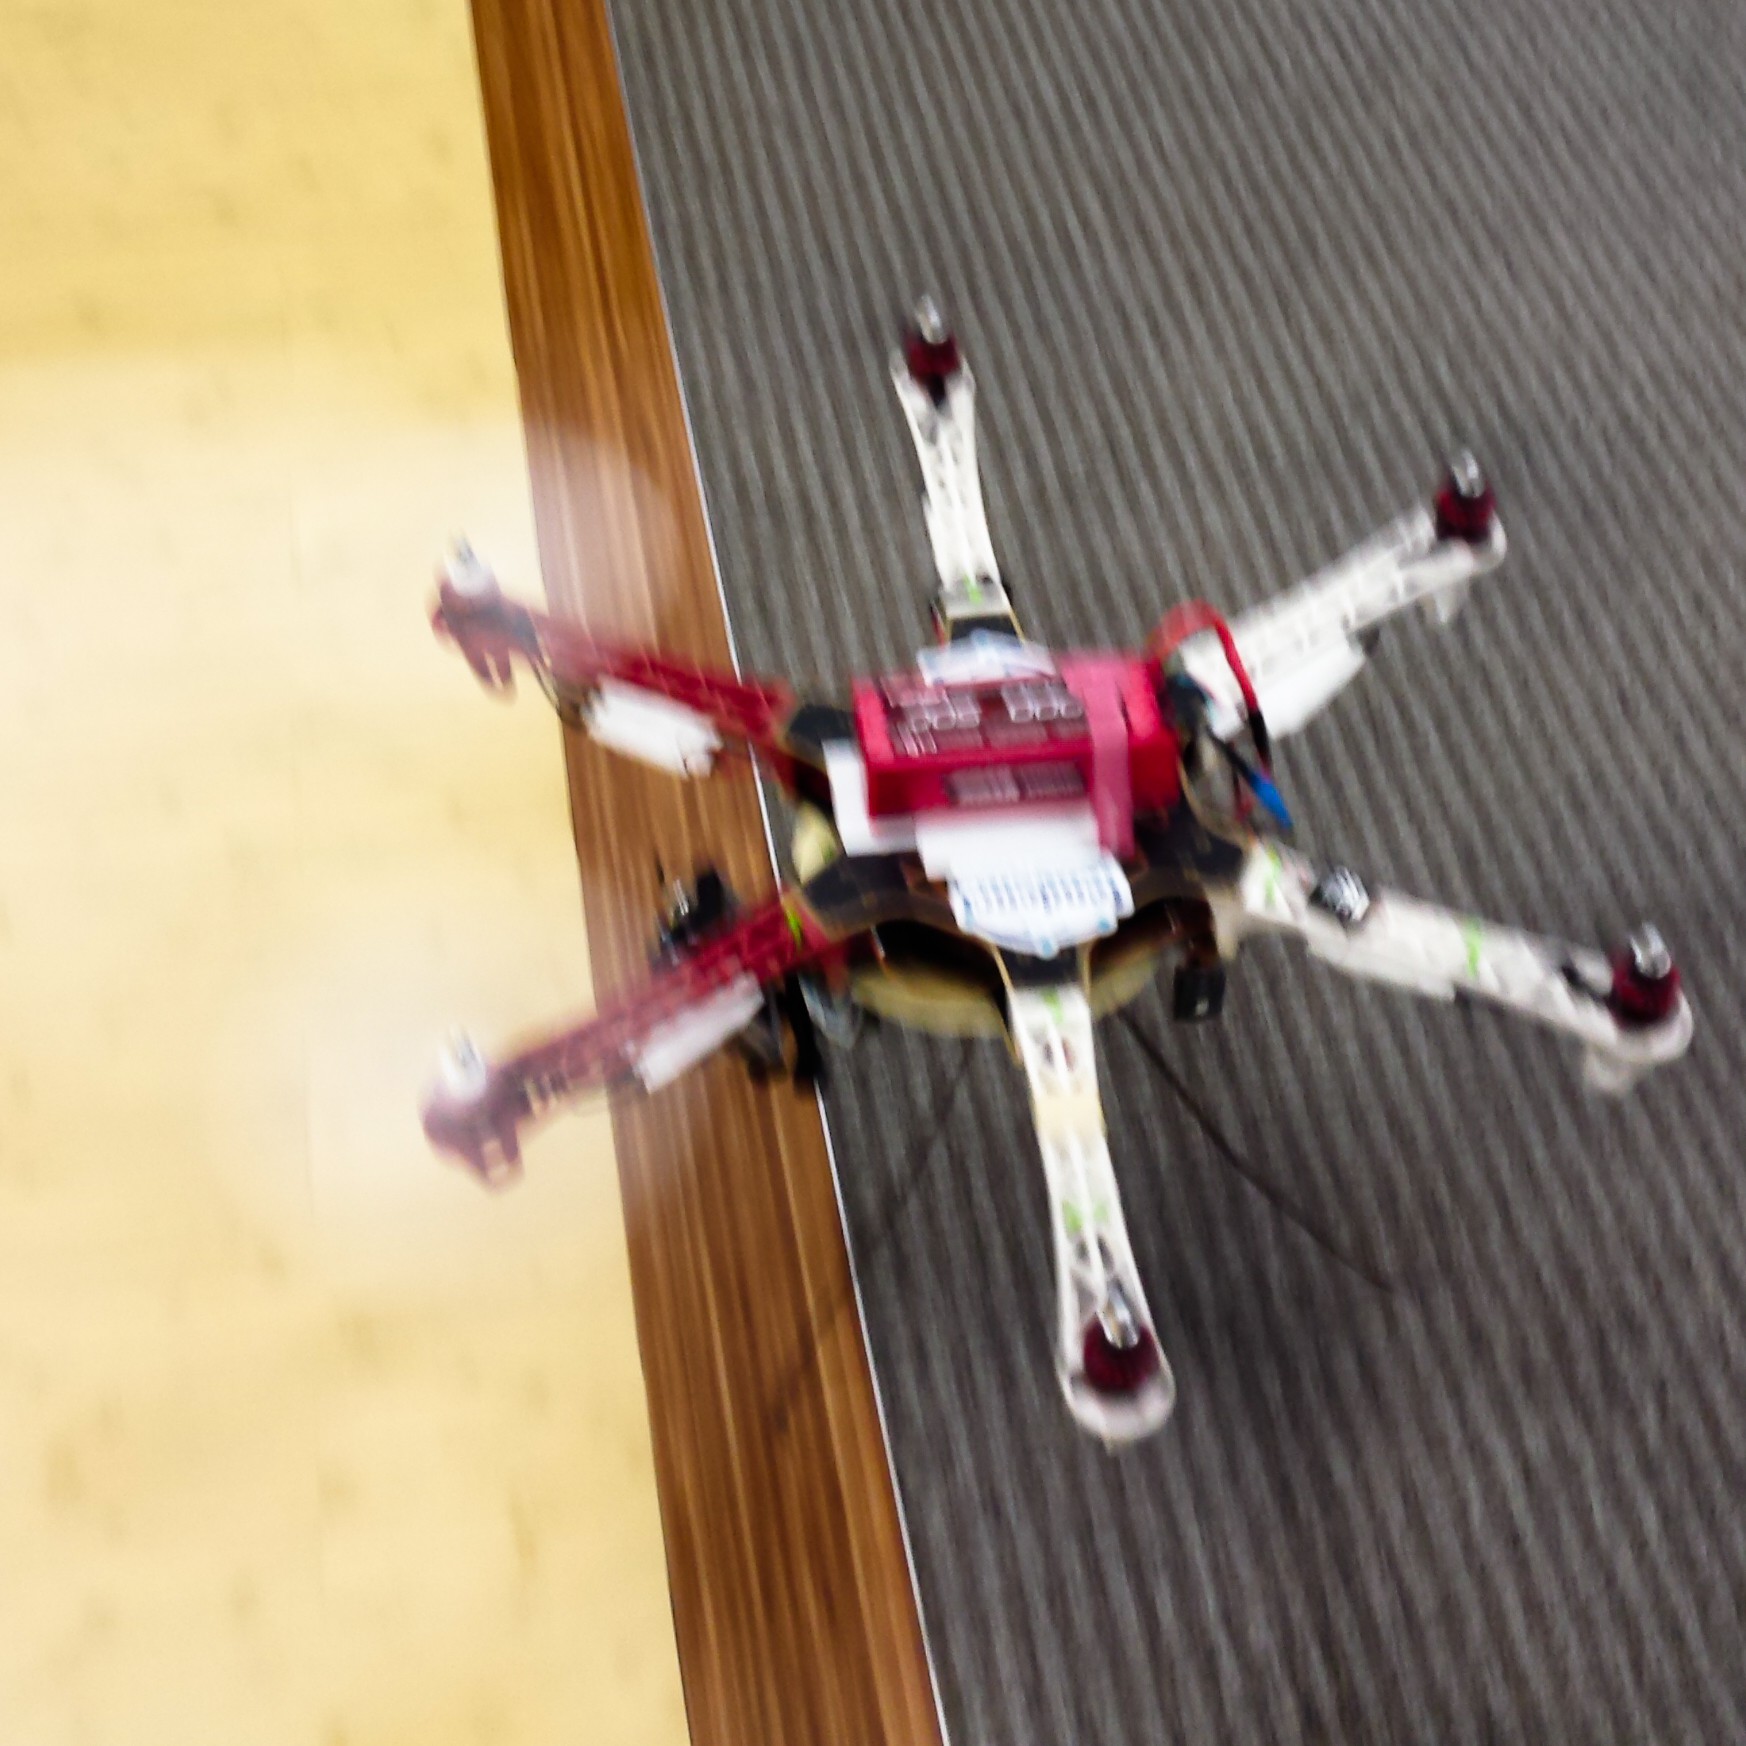 The company hexacopter